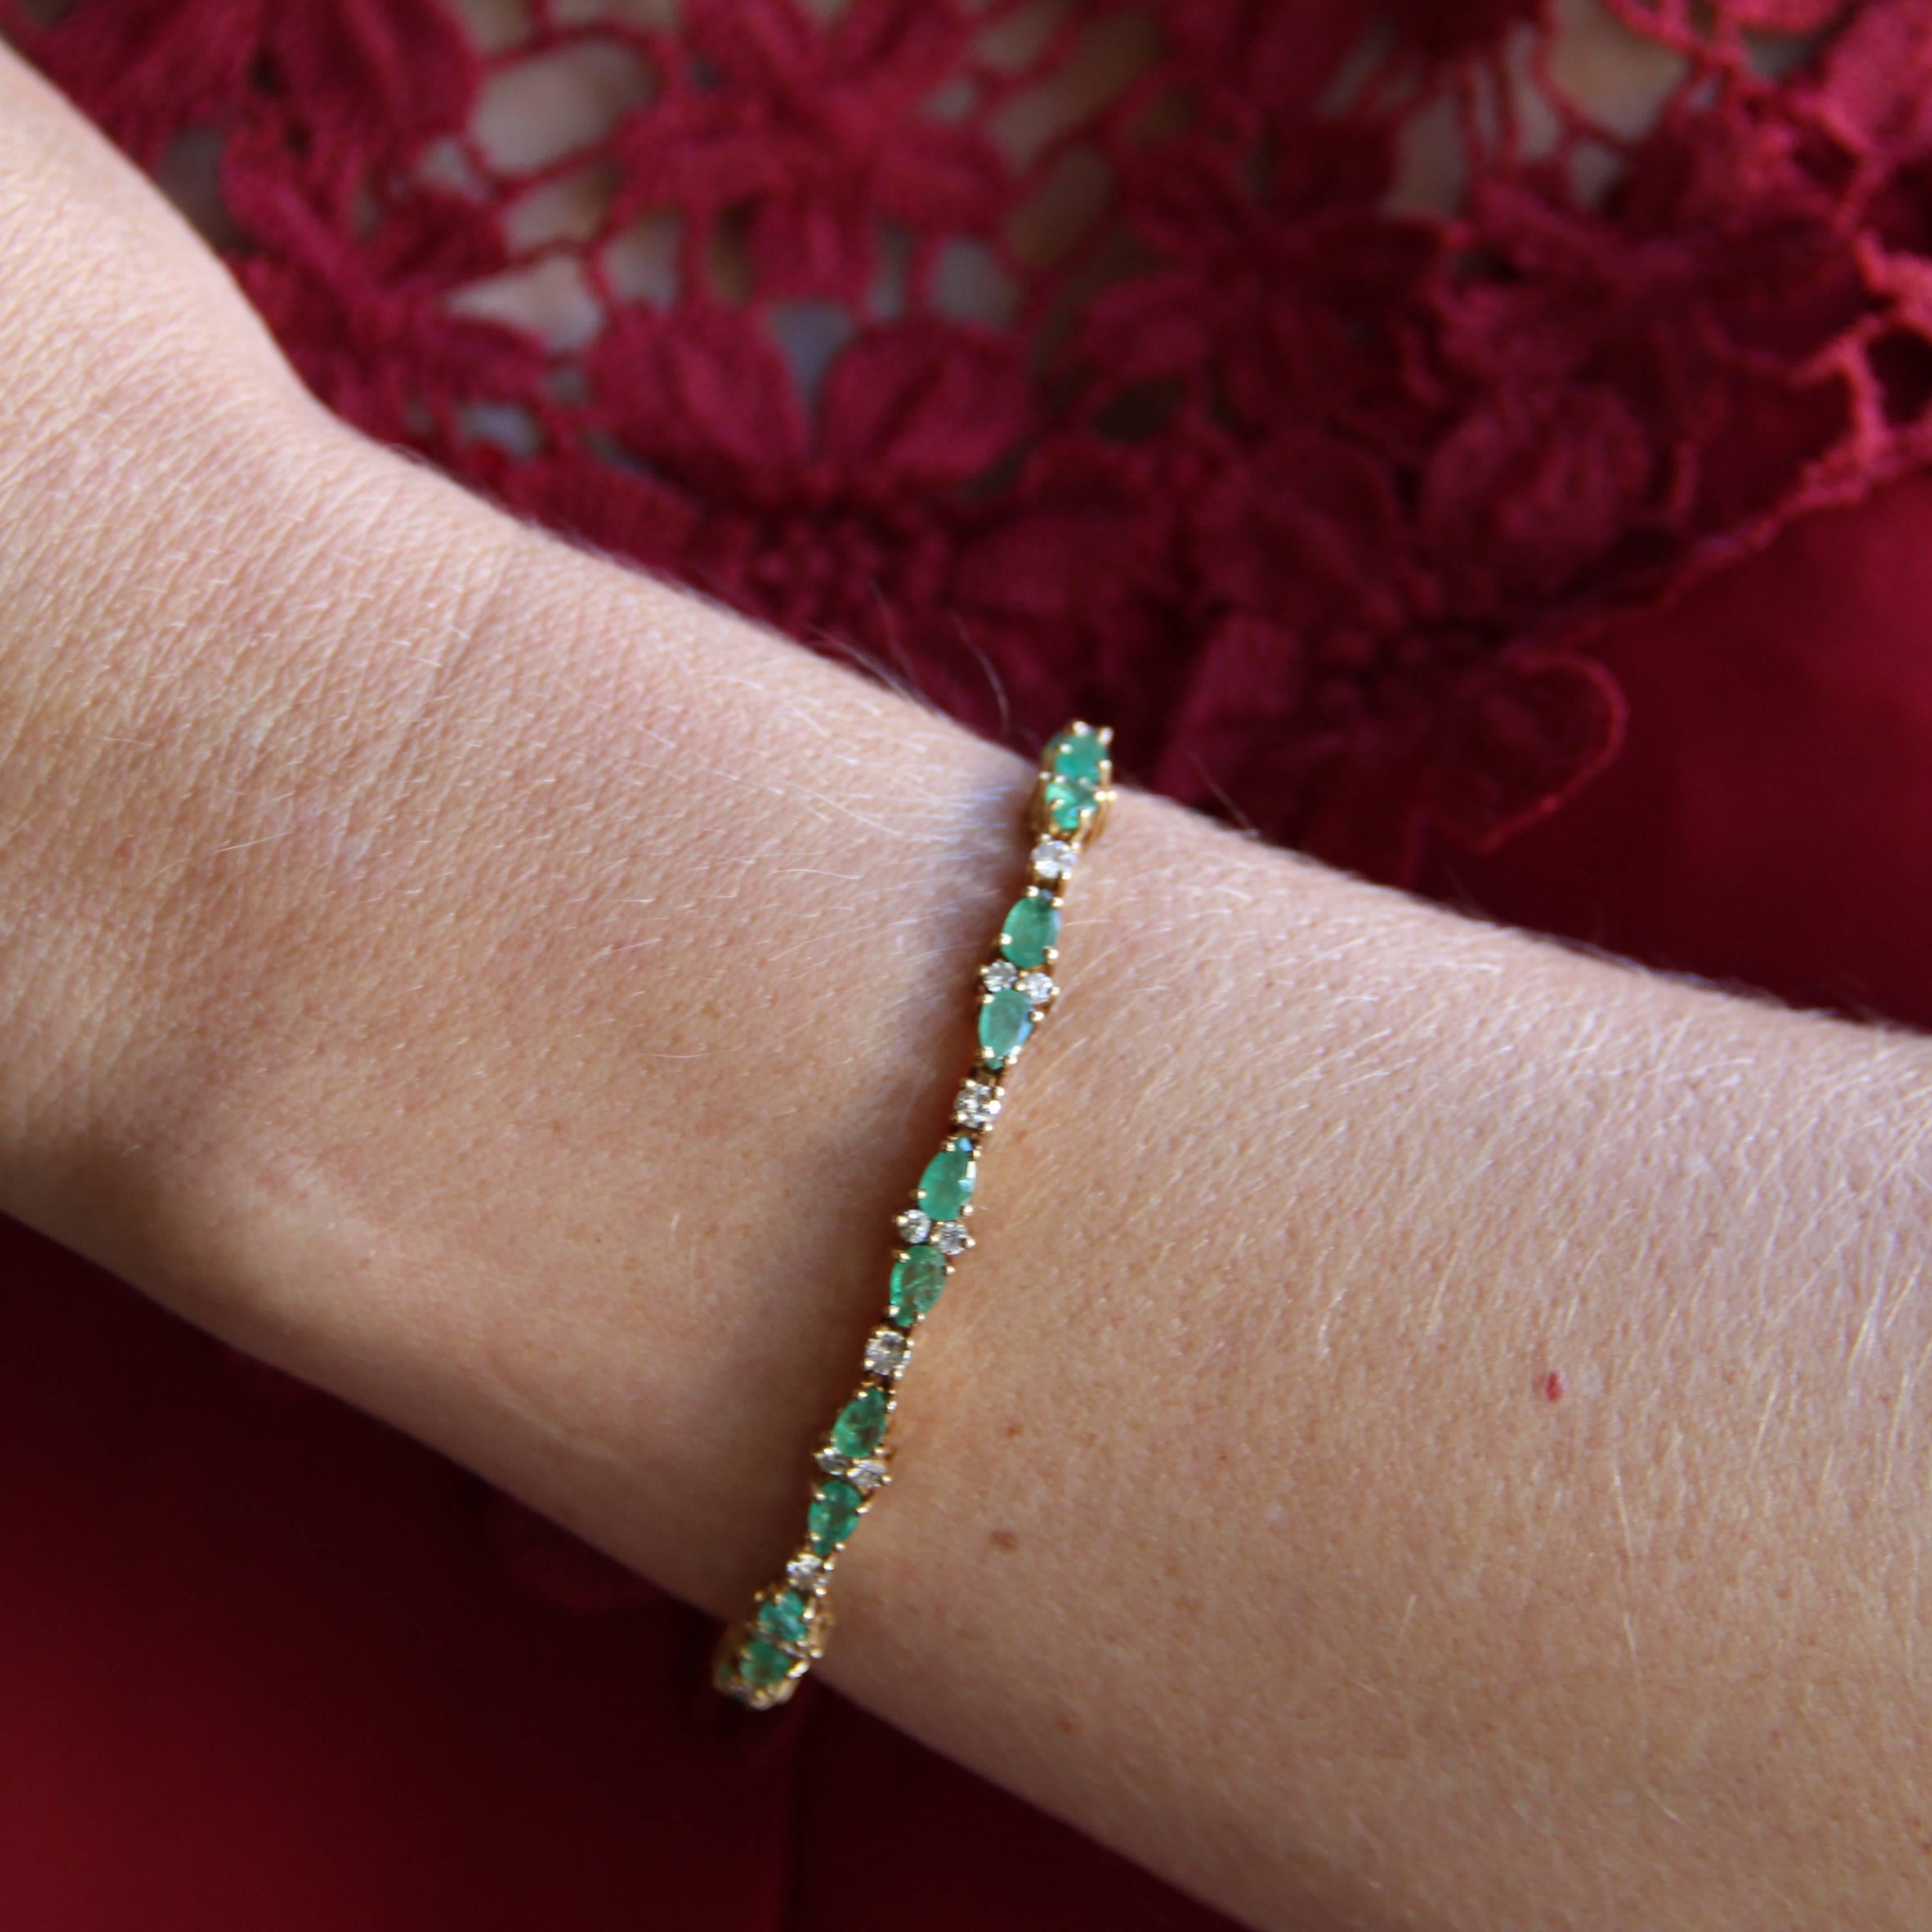 Bracelet in 18 carats yellow gold bracelet, eagle's head hallmark.
Made of an articulated line in yellow gold, this beautiful bracelet is set with an alternation of modern brilliant cut diamonds and pear cut emeralds. The clasp is ratchet with 8 and